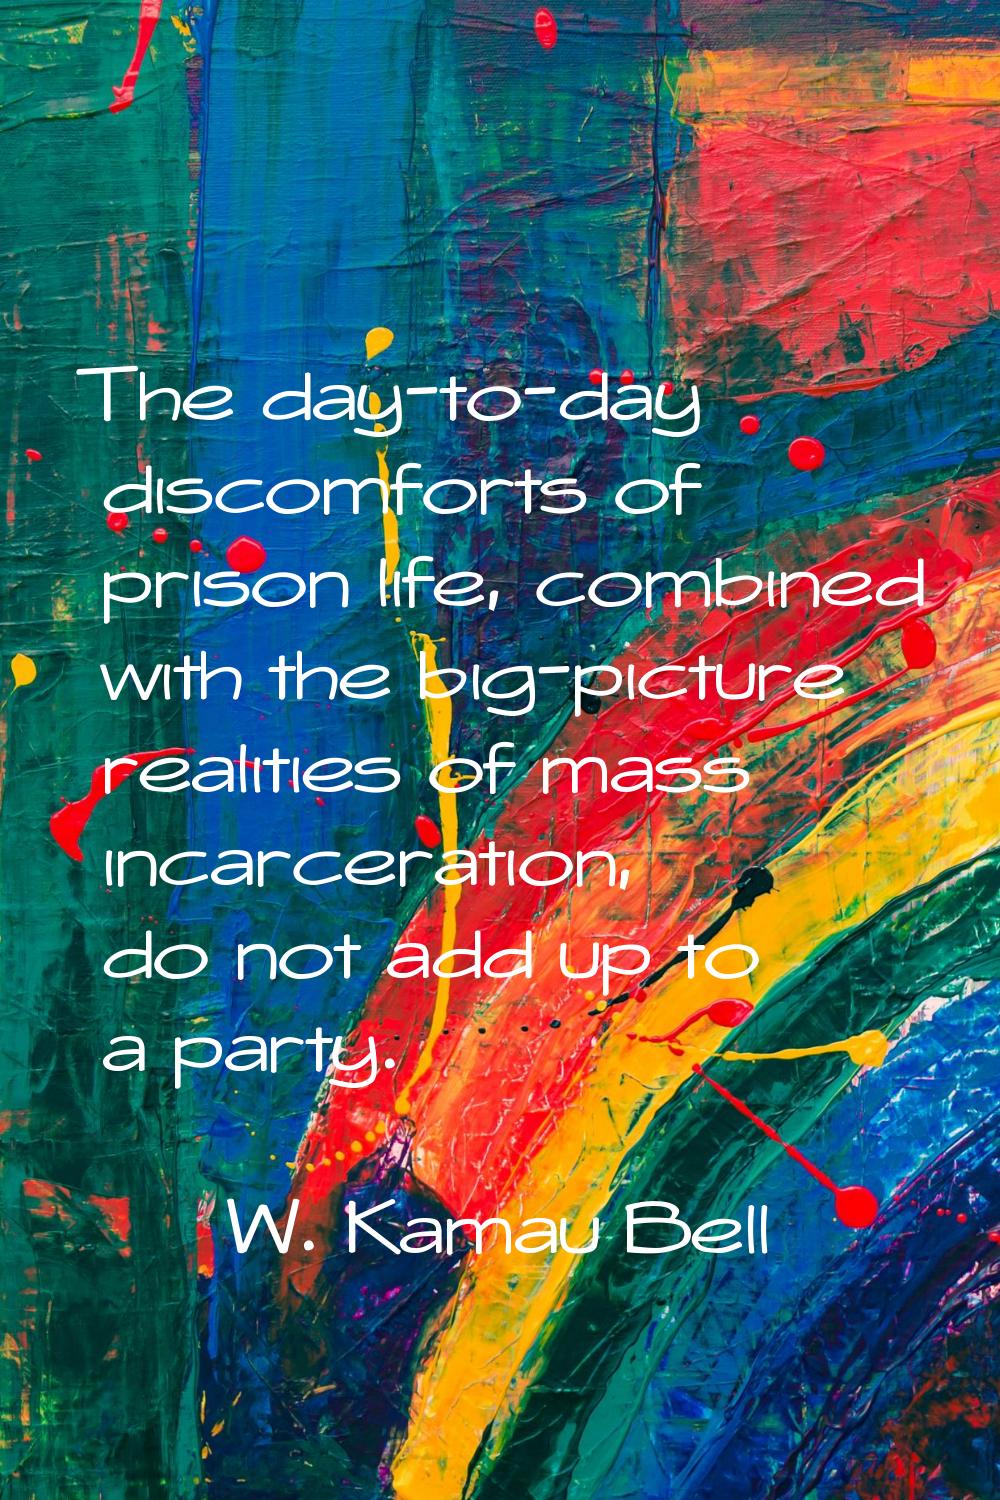 The day-to-day discomforts of prison life, combined with the big-picture realities of mass incarcer